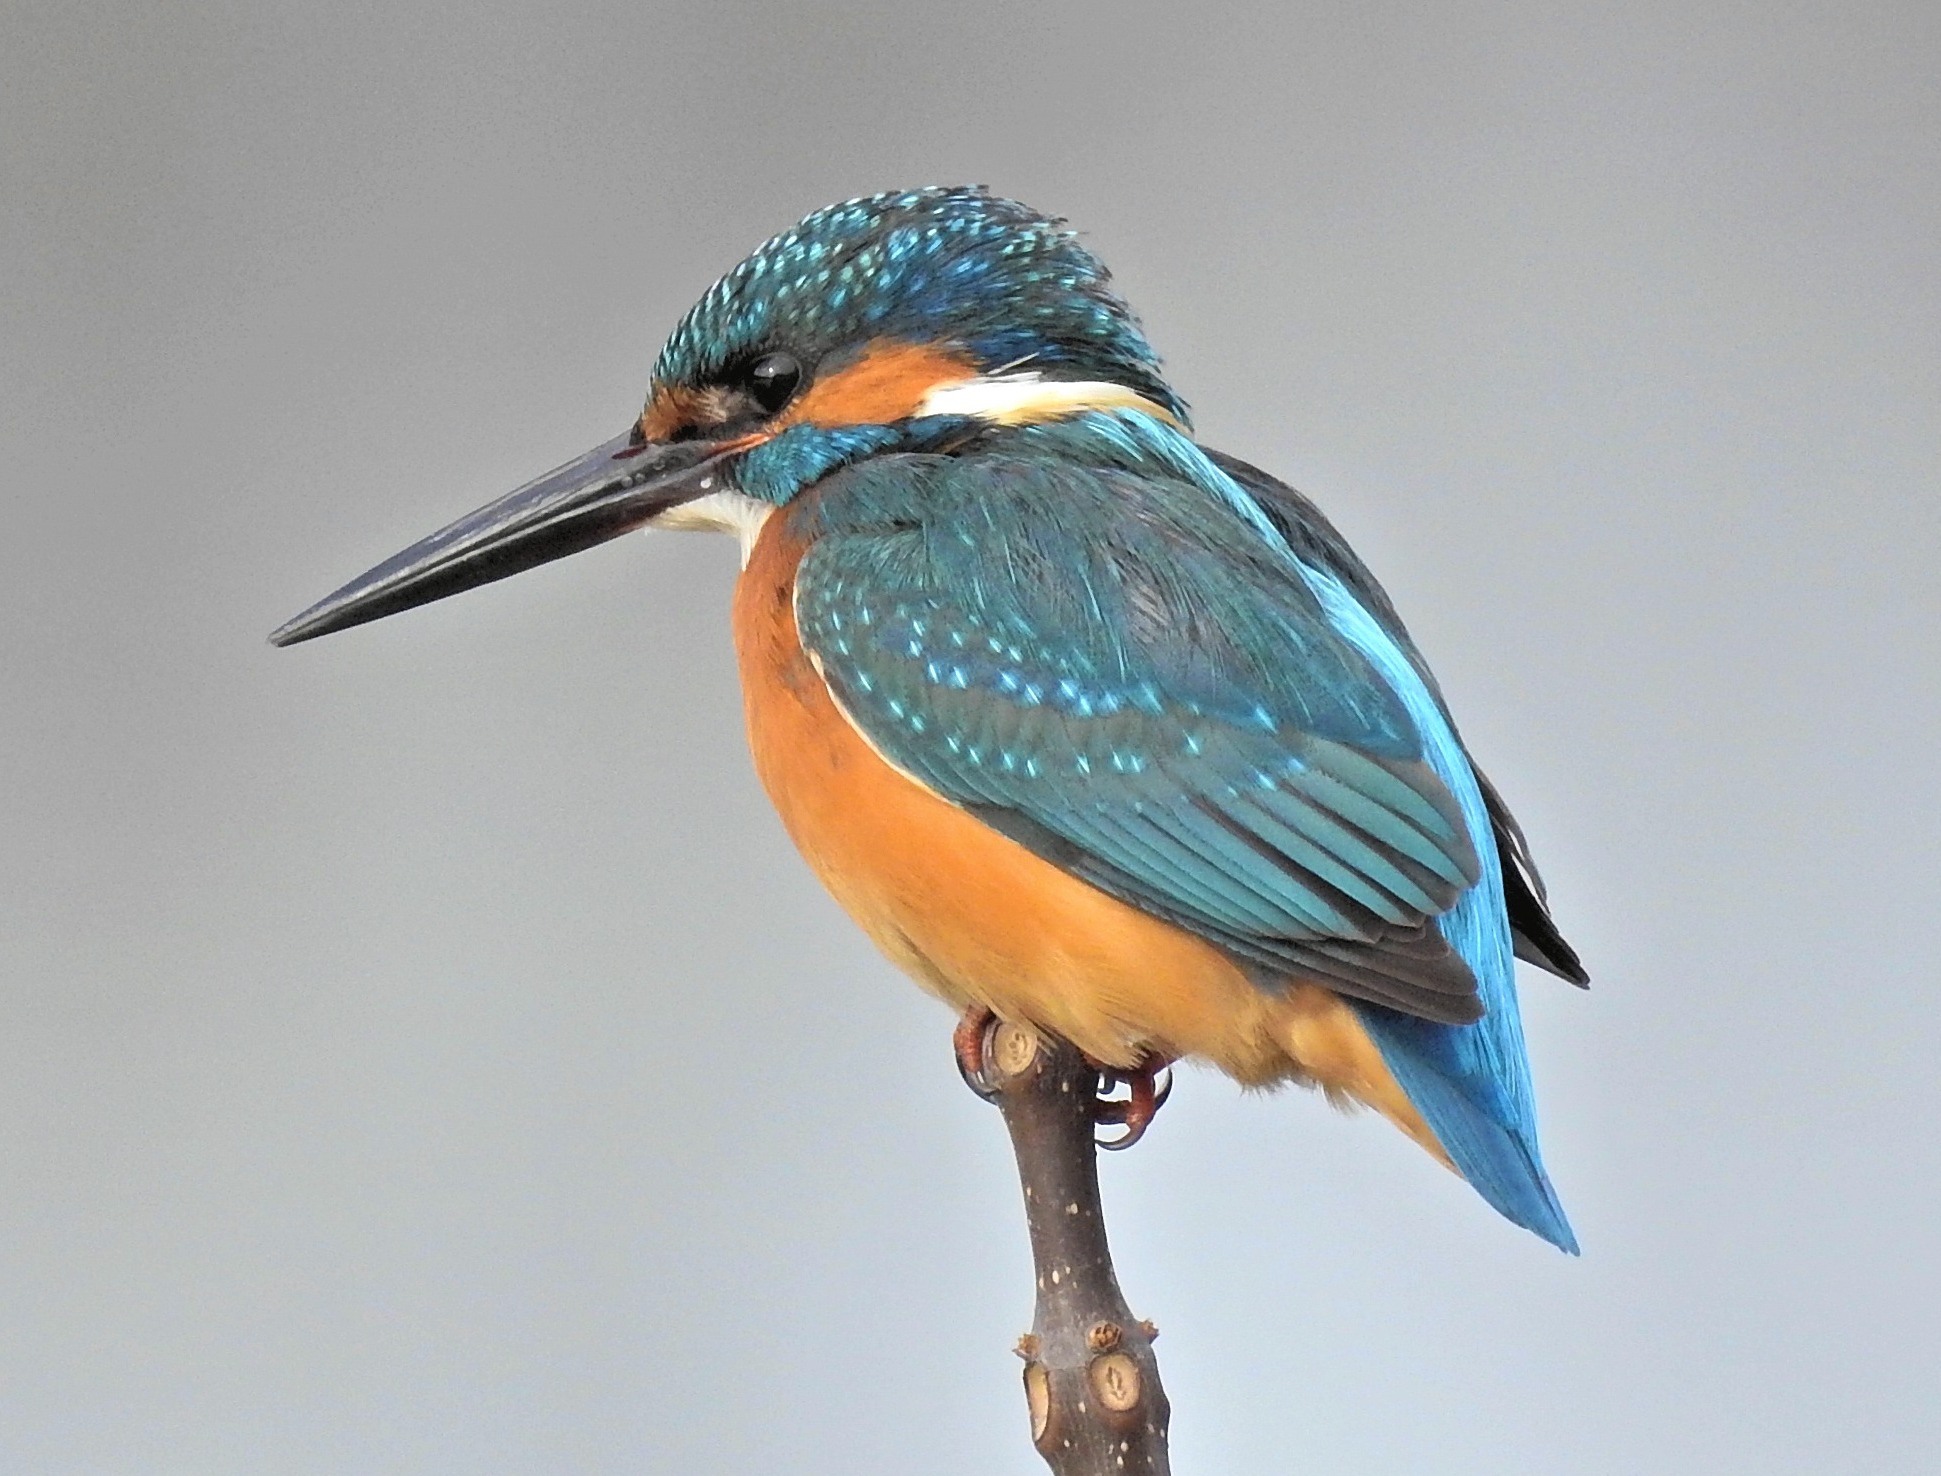 A common kingfisher perched at the end of a small branch. The bird has a teal head, back and wings, and a orange breast as well as an orange stripe over the lower part of its eye.